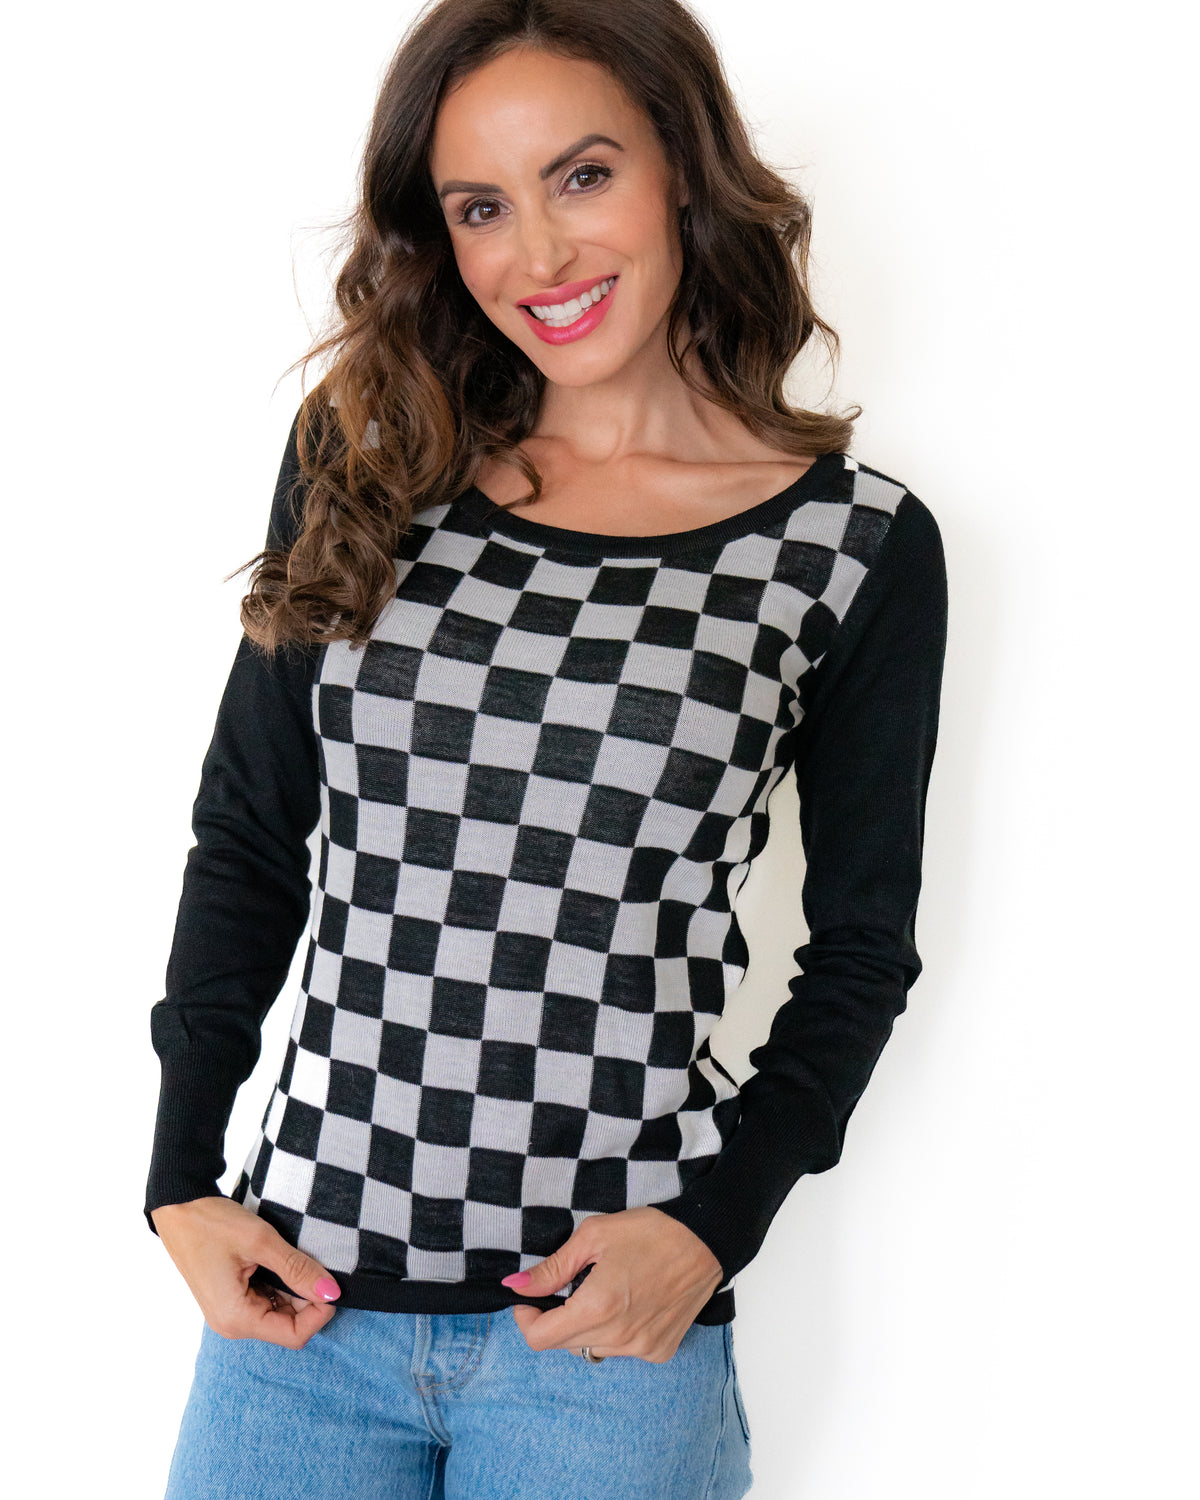 Race Ready Checkered Knit Top